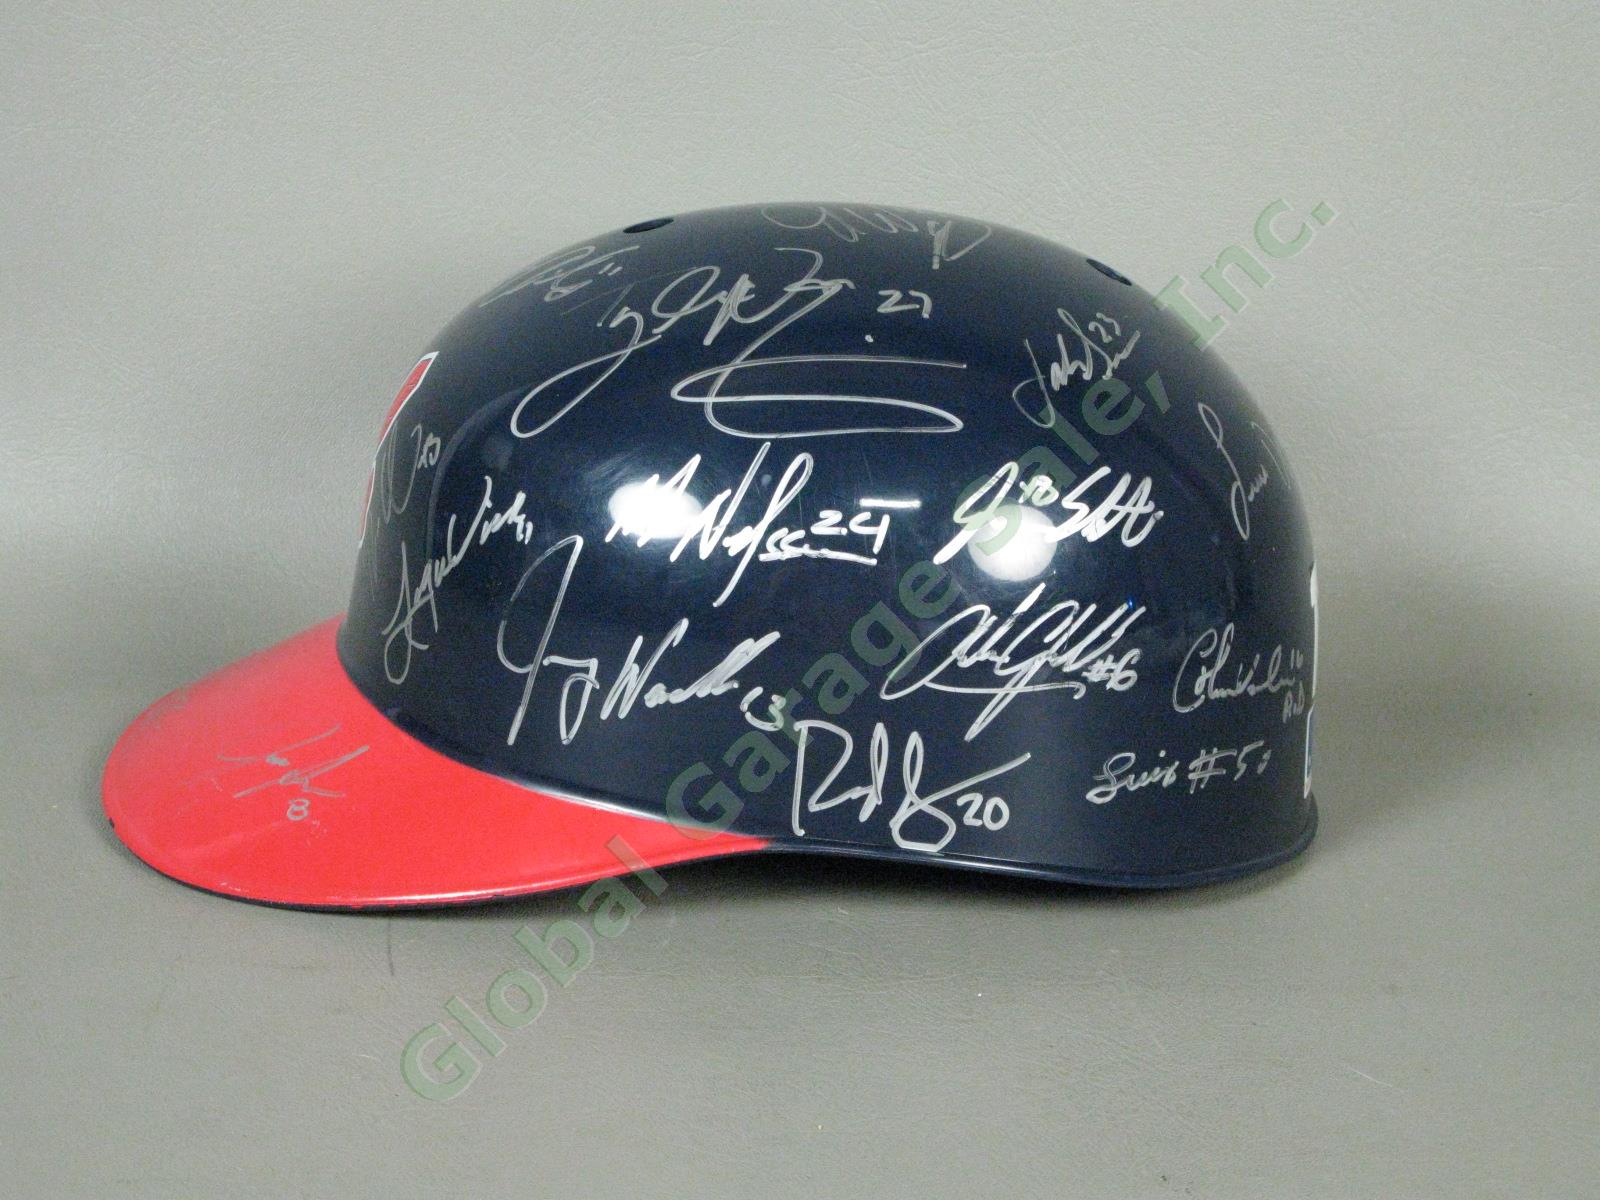 2012 Mahoning Valley Scrappers Team Signed Baseball Helmet Cleveland Indians NR 3